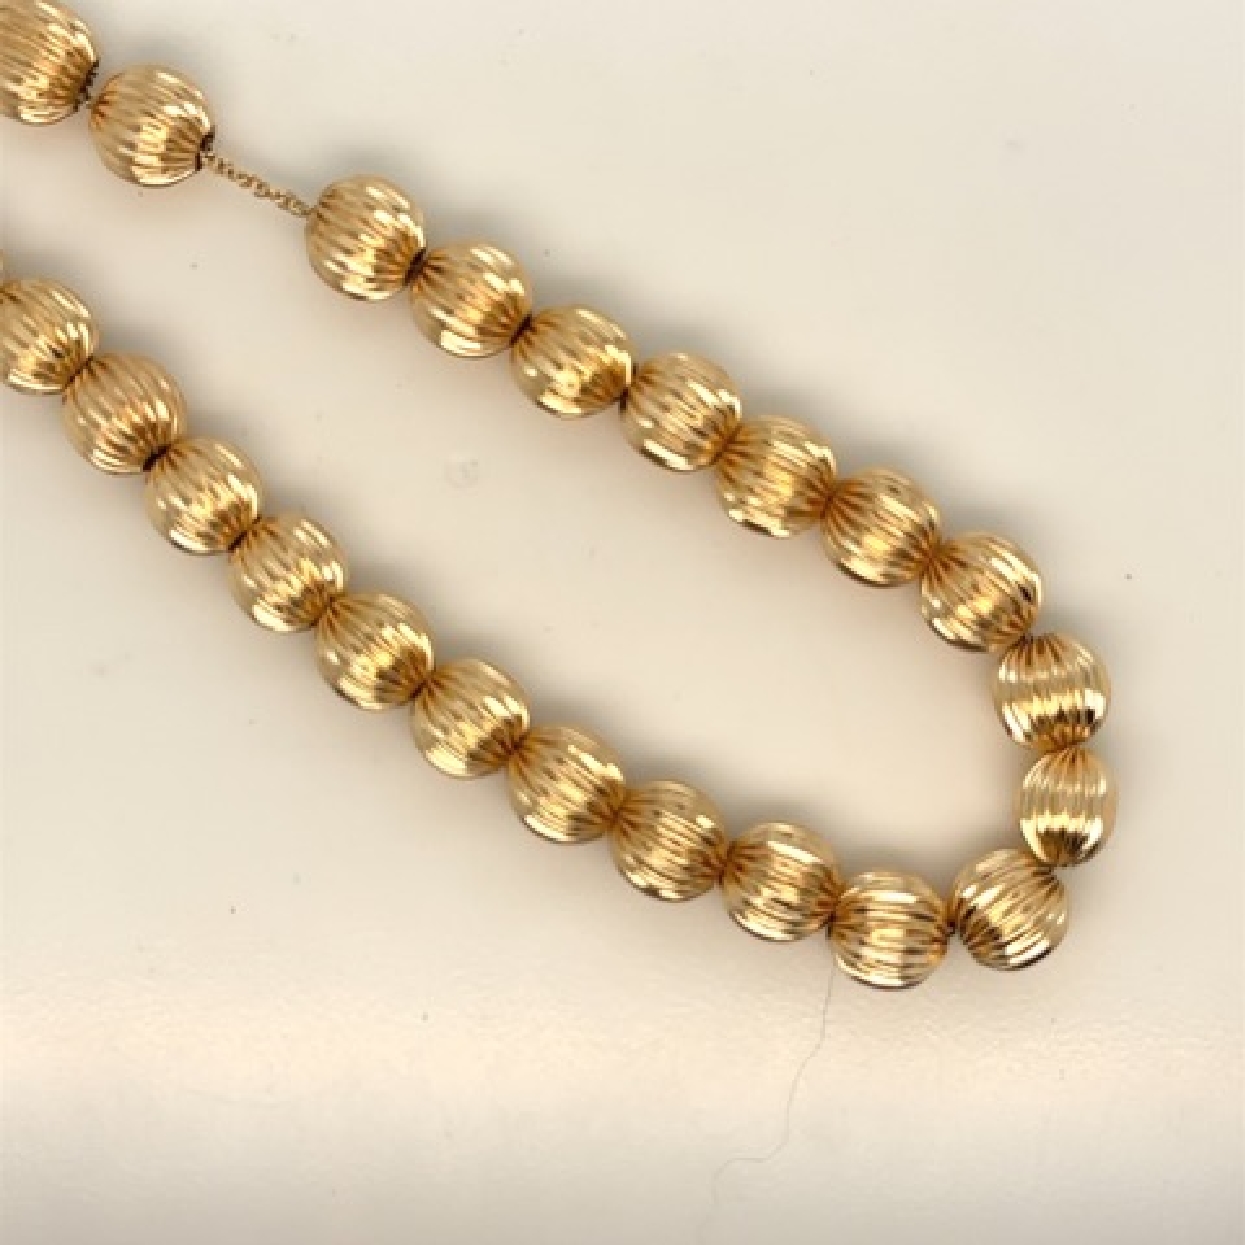 14k Yellow Gold Add a Bead Necklace with 7mm Beads
20 Inches